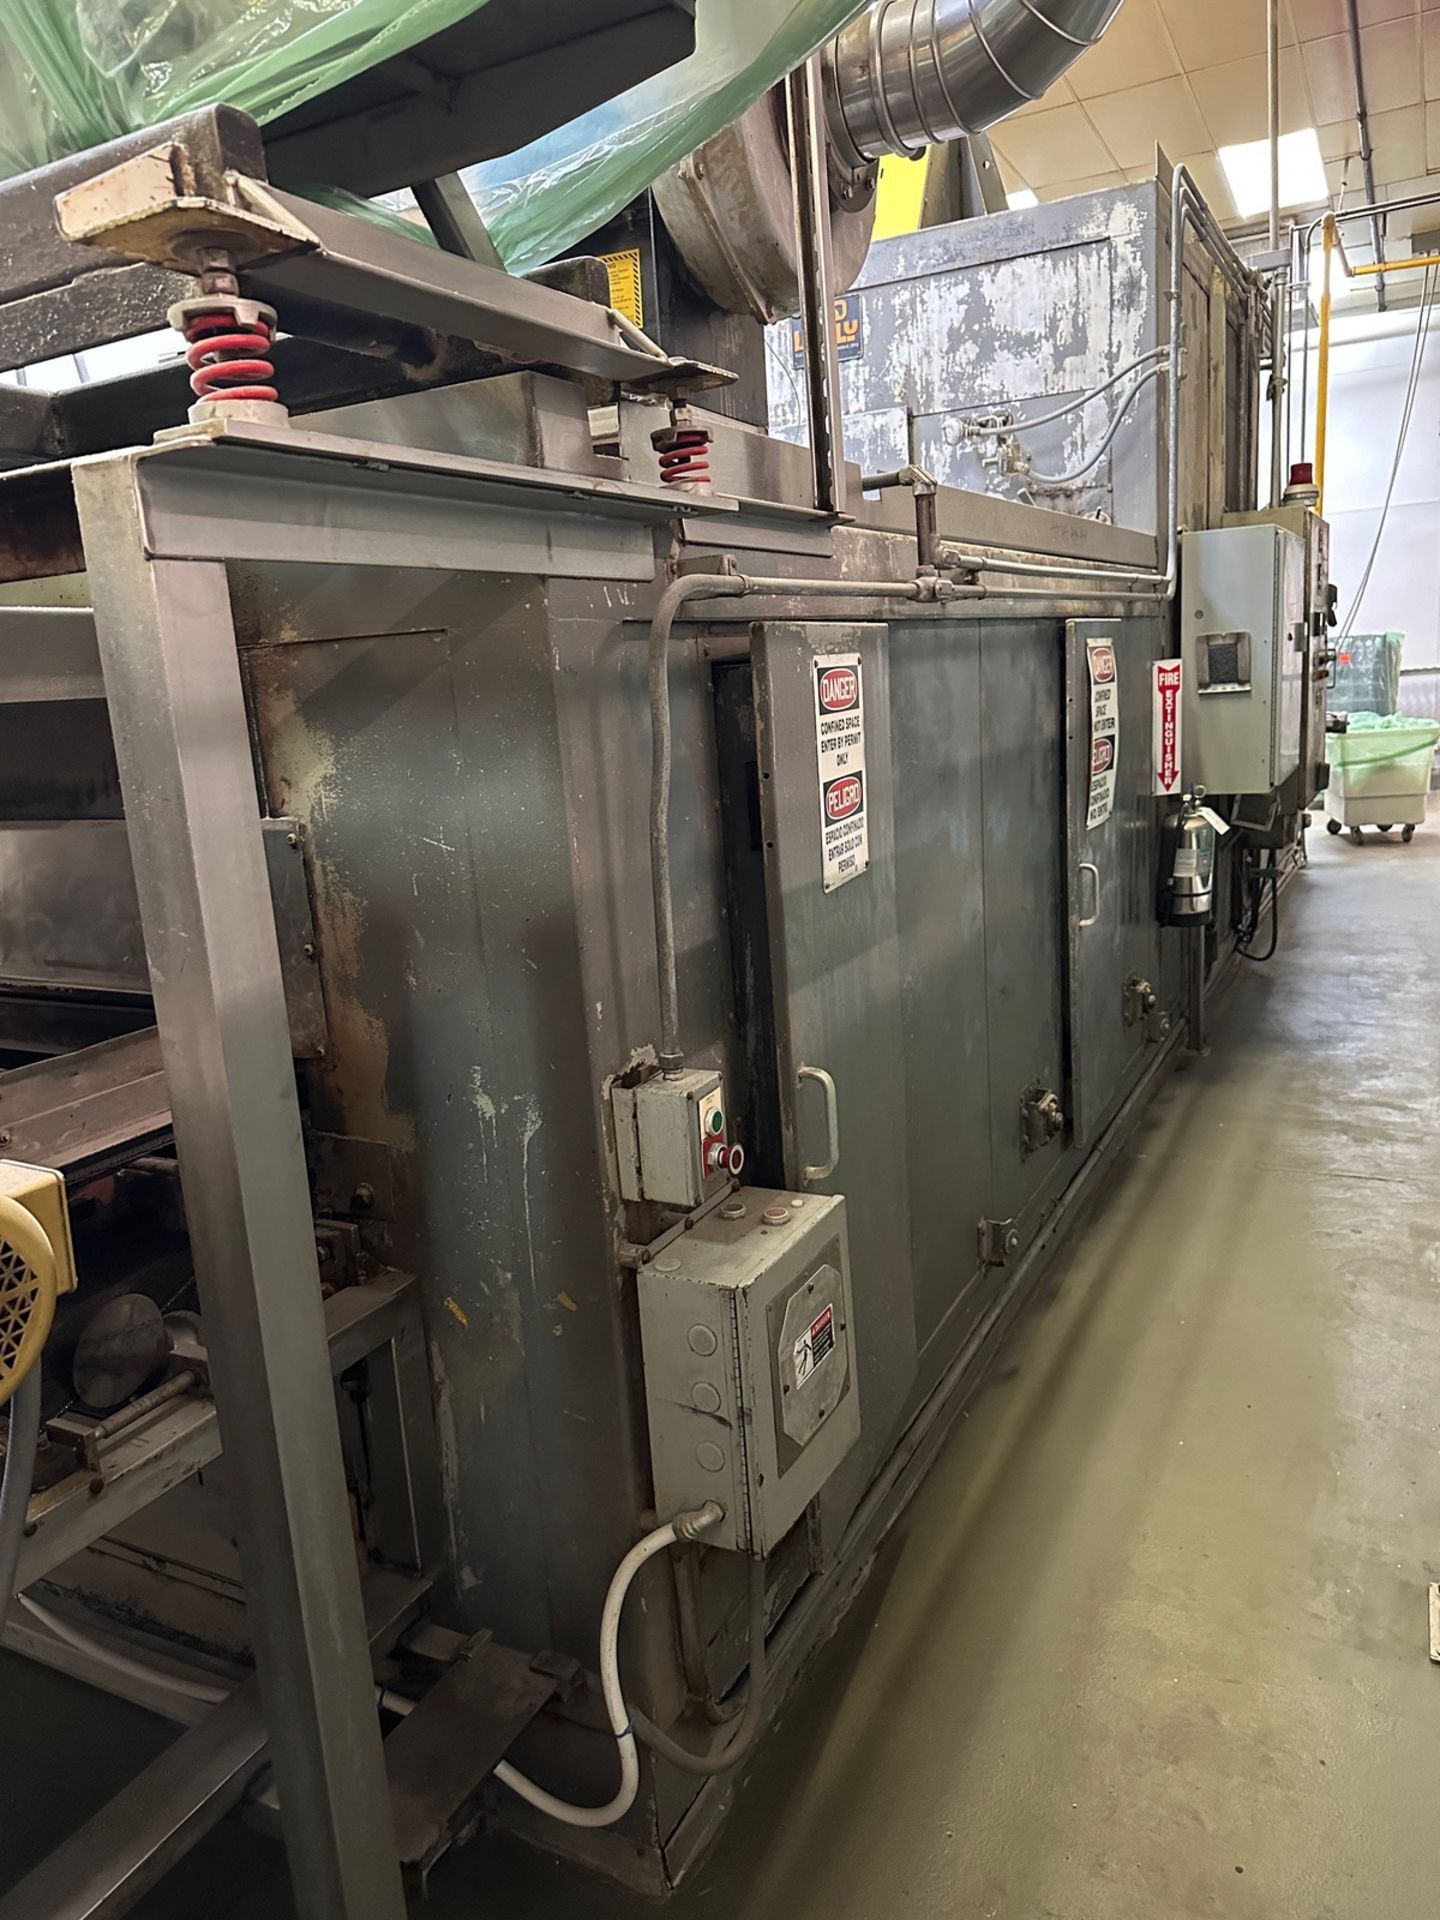 Lanly 1,200,000 BTU Natural Gas Oven with Approx. 4' x 36' Belt with 6" | Rig Fee $16500